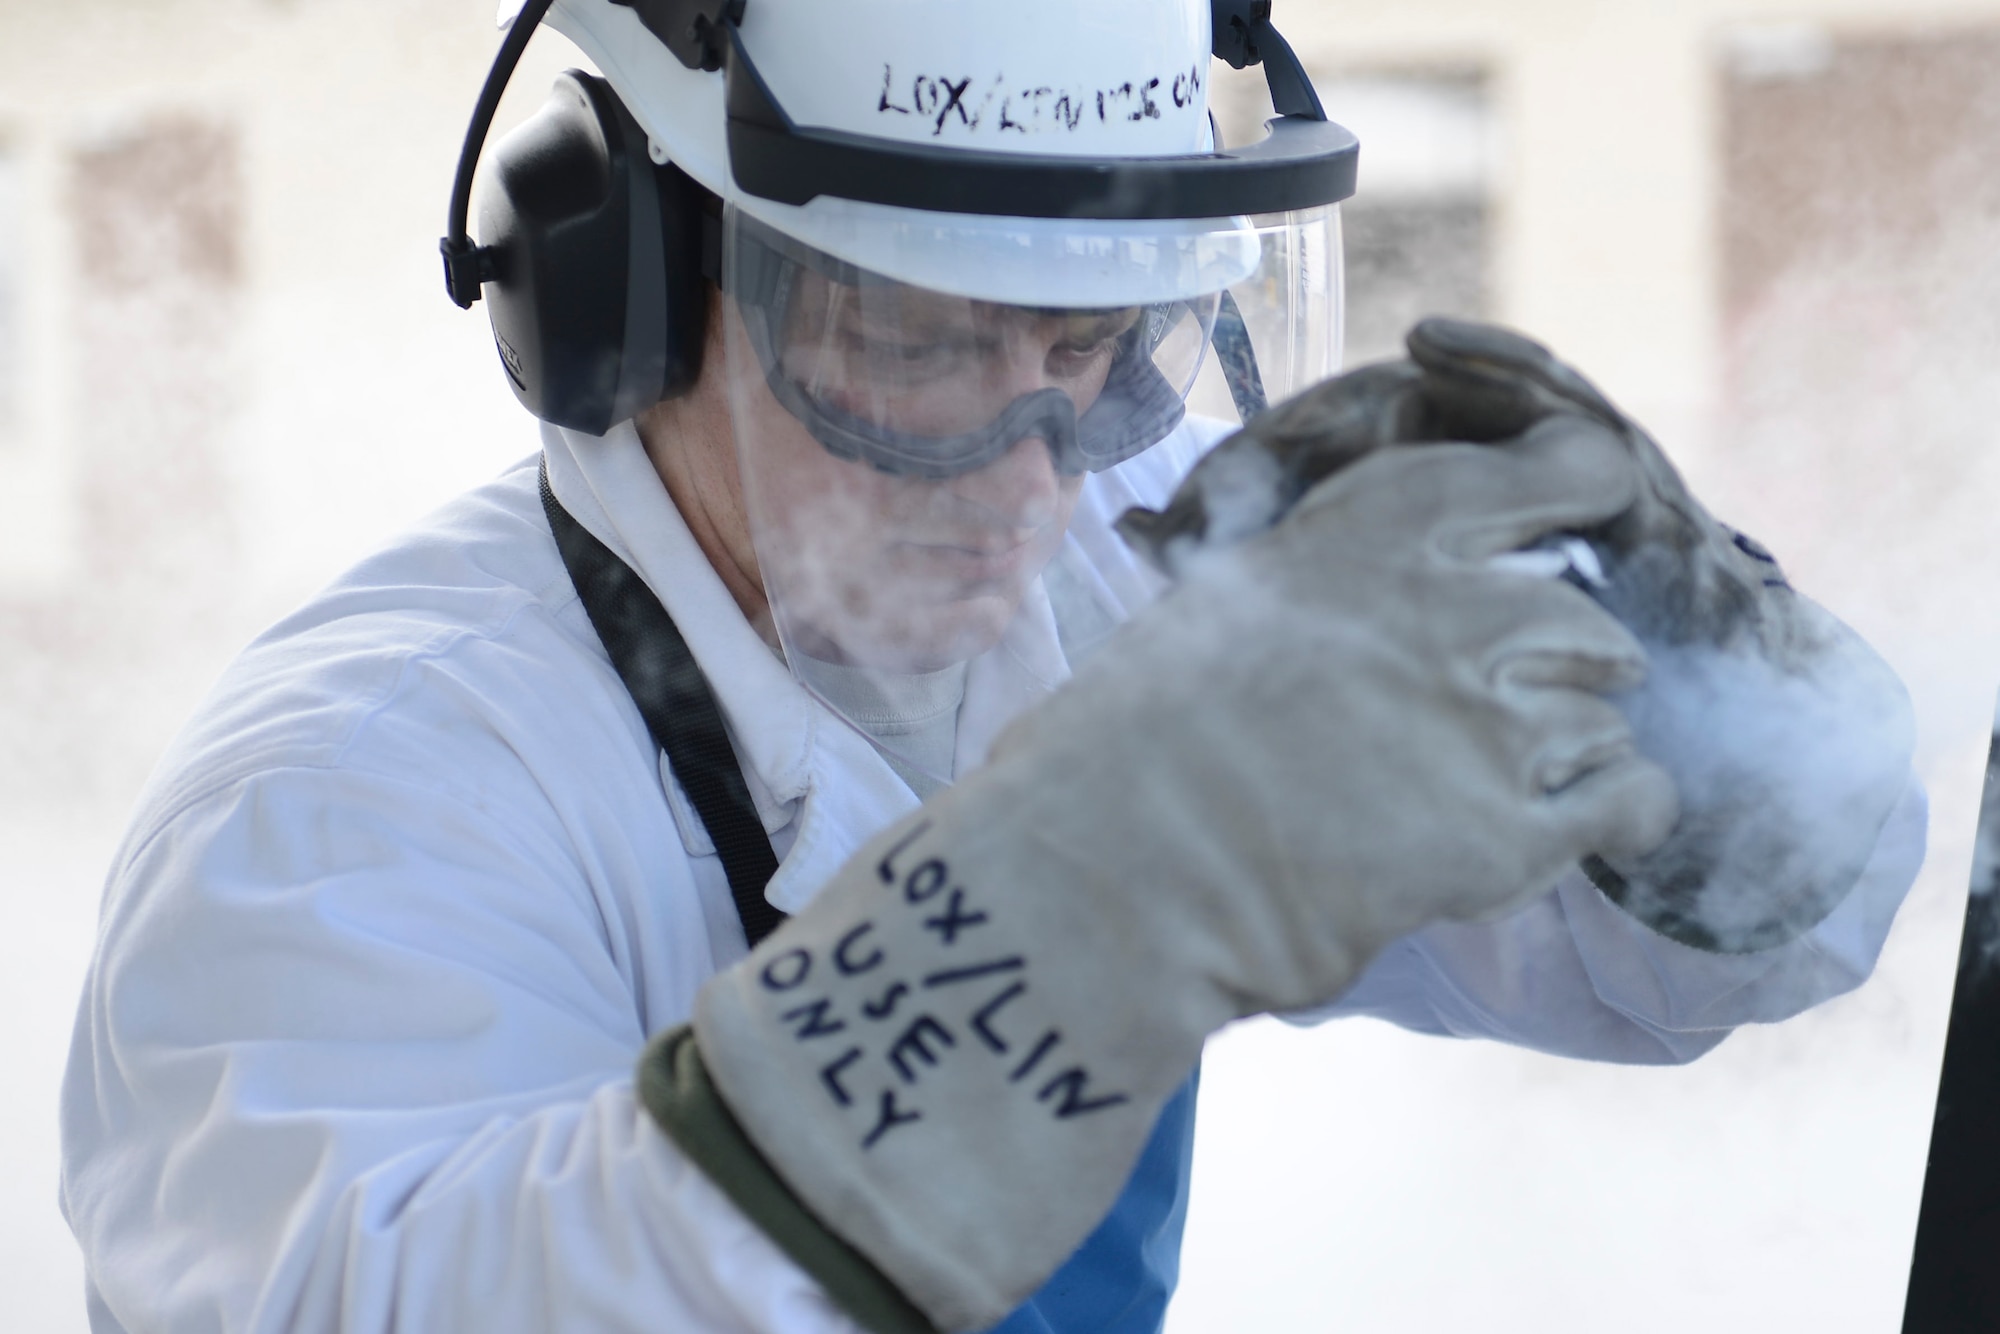 Senior Airman Jeffery Halda samples liquid oxygen for cleanliness on Ramstein Air Base, Germany, Sept. 3, 2014. Liquid oxygen is primarily used as breathing oxygen for aircrew members while flying over 10,000 ft. Halda is a hydrants technician with the 86th Logistics Readiness Squadron. (U.S. Air Force photo/Airman 1st Class Michael Stuart)